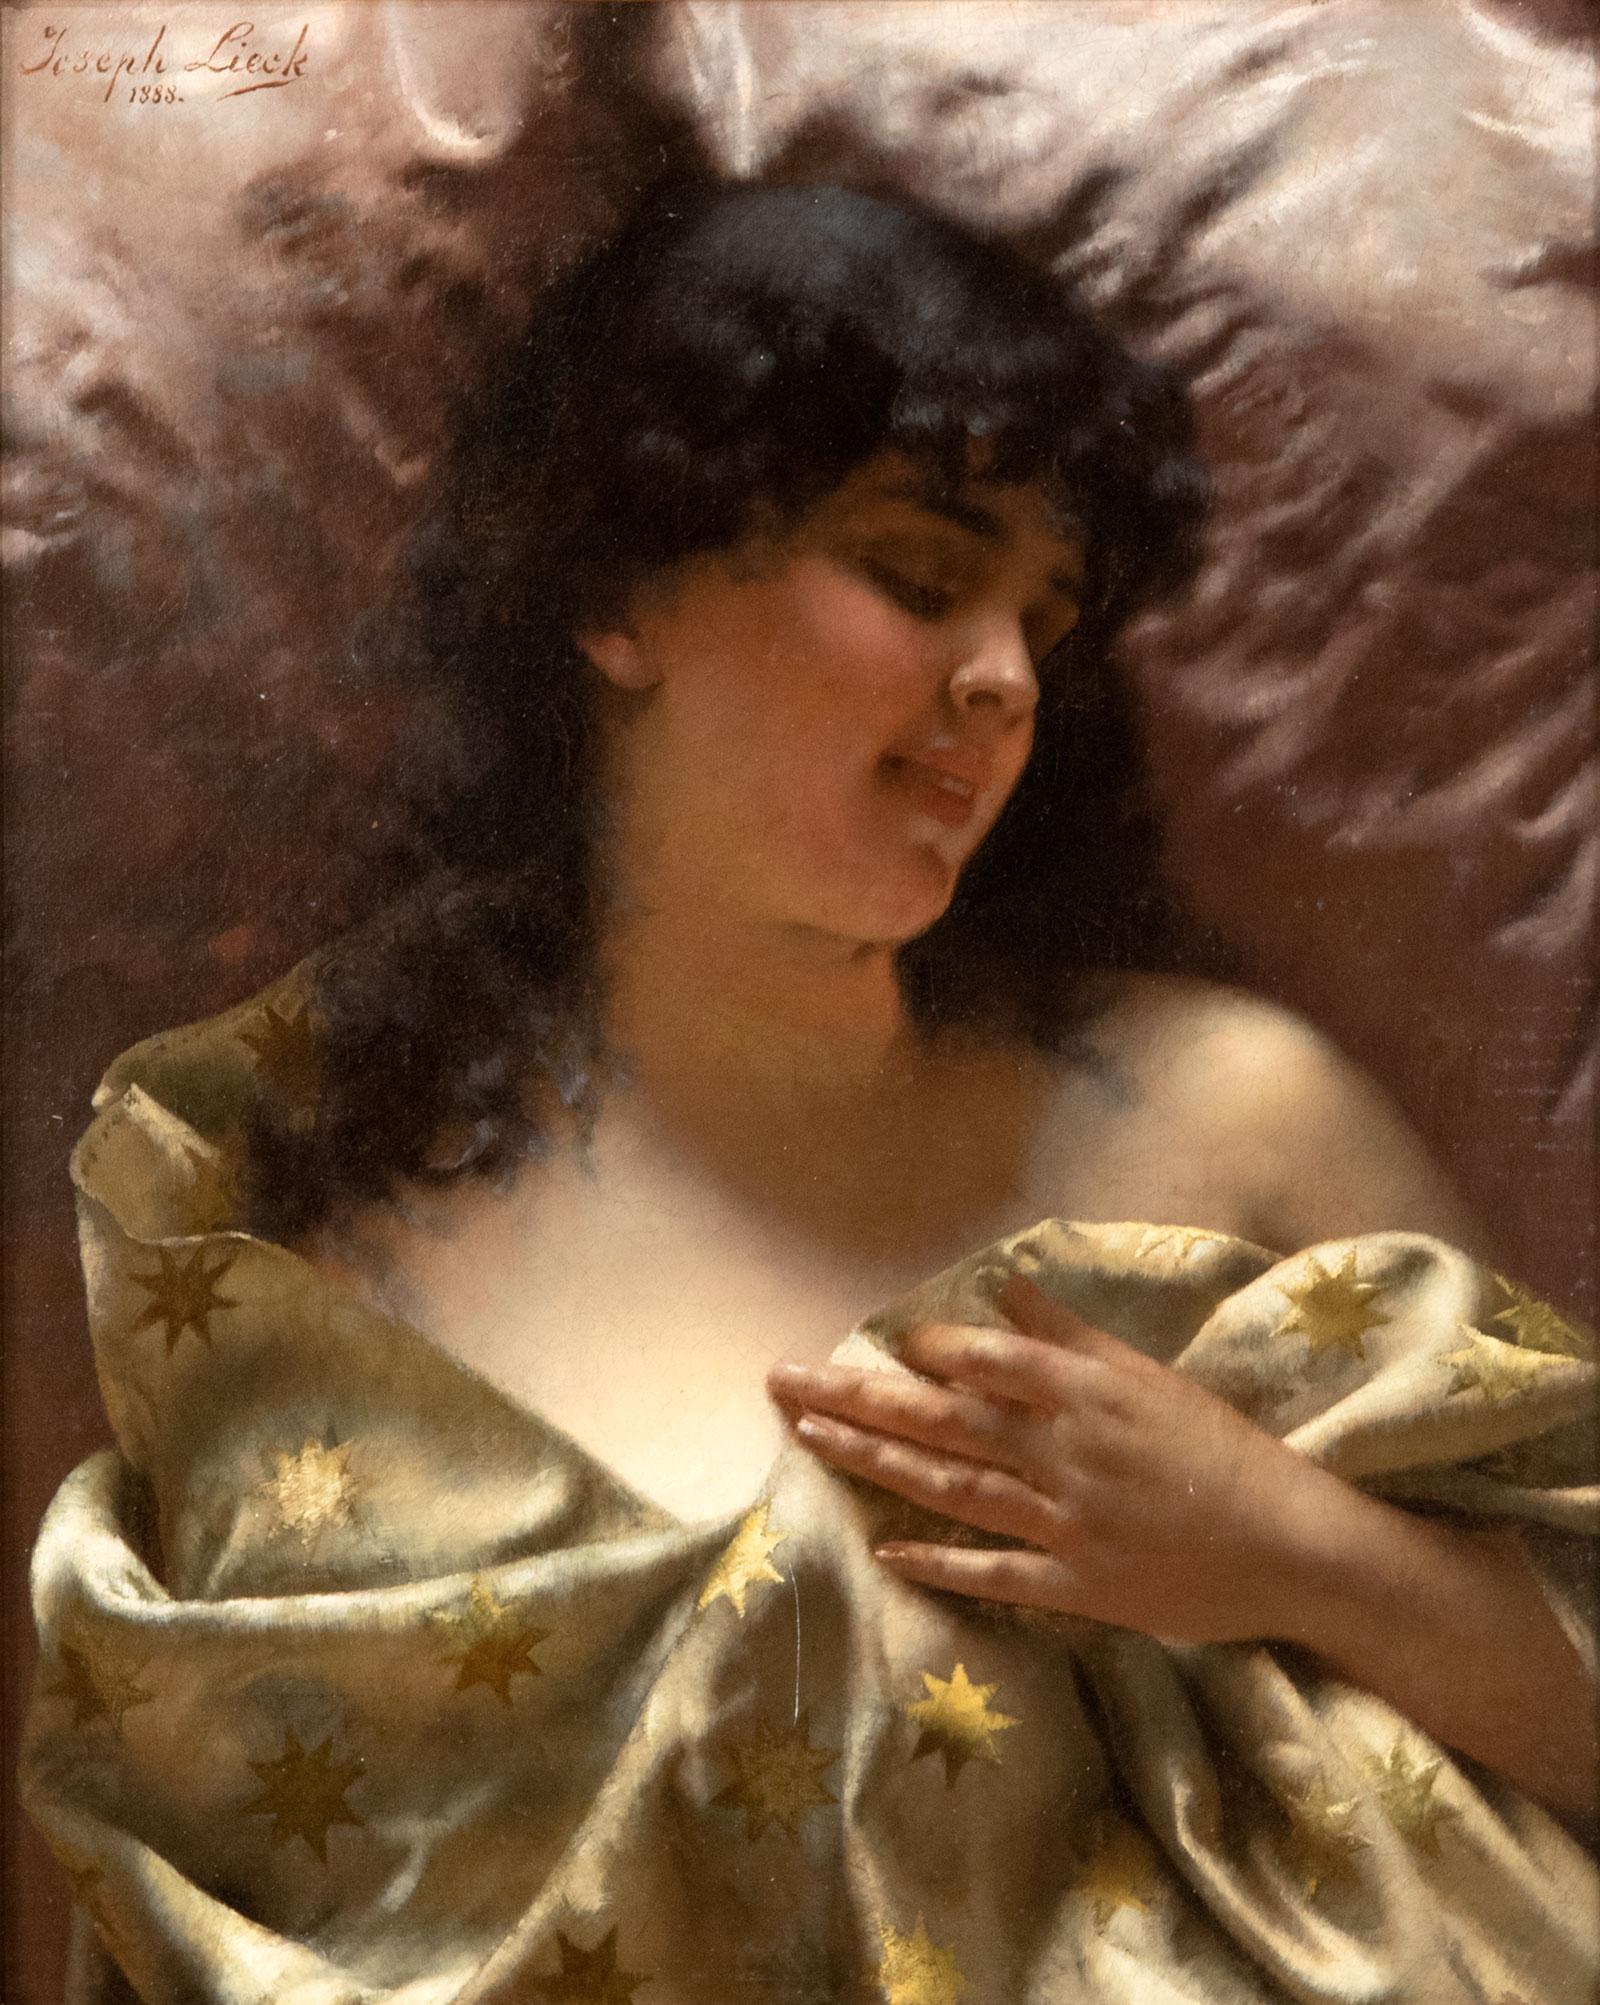 Joseph Leick (German, 1849-1914)
Sleeping Beauty (1888)
Oil on canvas

A perennial award-winner at the German National Salon, Leick was a graduate of the Academy of Arts in Berlin. This work, sometimes called Sleeping Beauty or Glamouröse Frau,